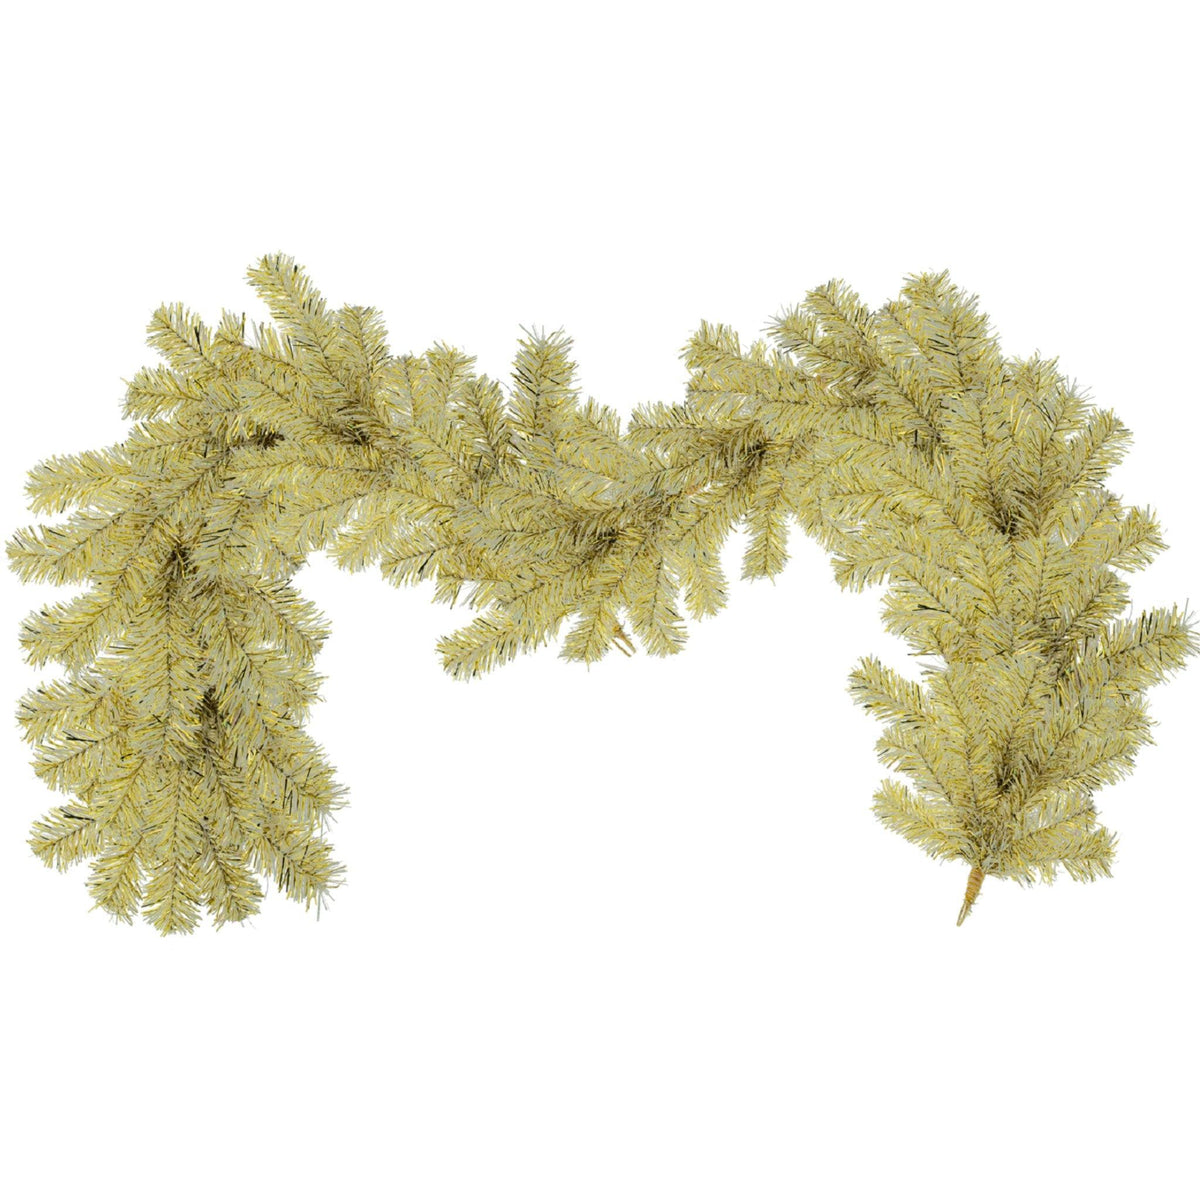 Shop for Lee Display's brand new 6FT Shiny Gold and Metallic Silver Tinsel Brush Garlands on sale at leedisplay.com.  